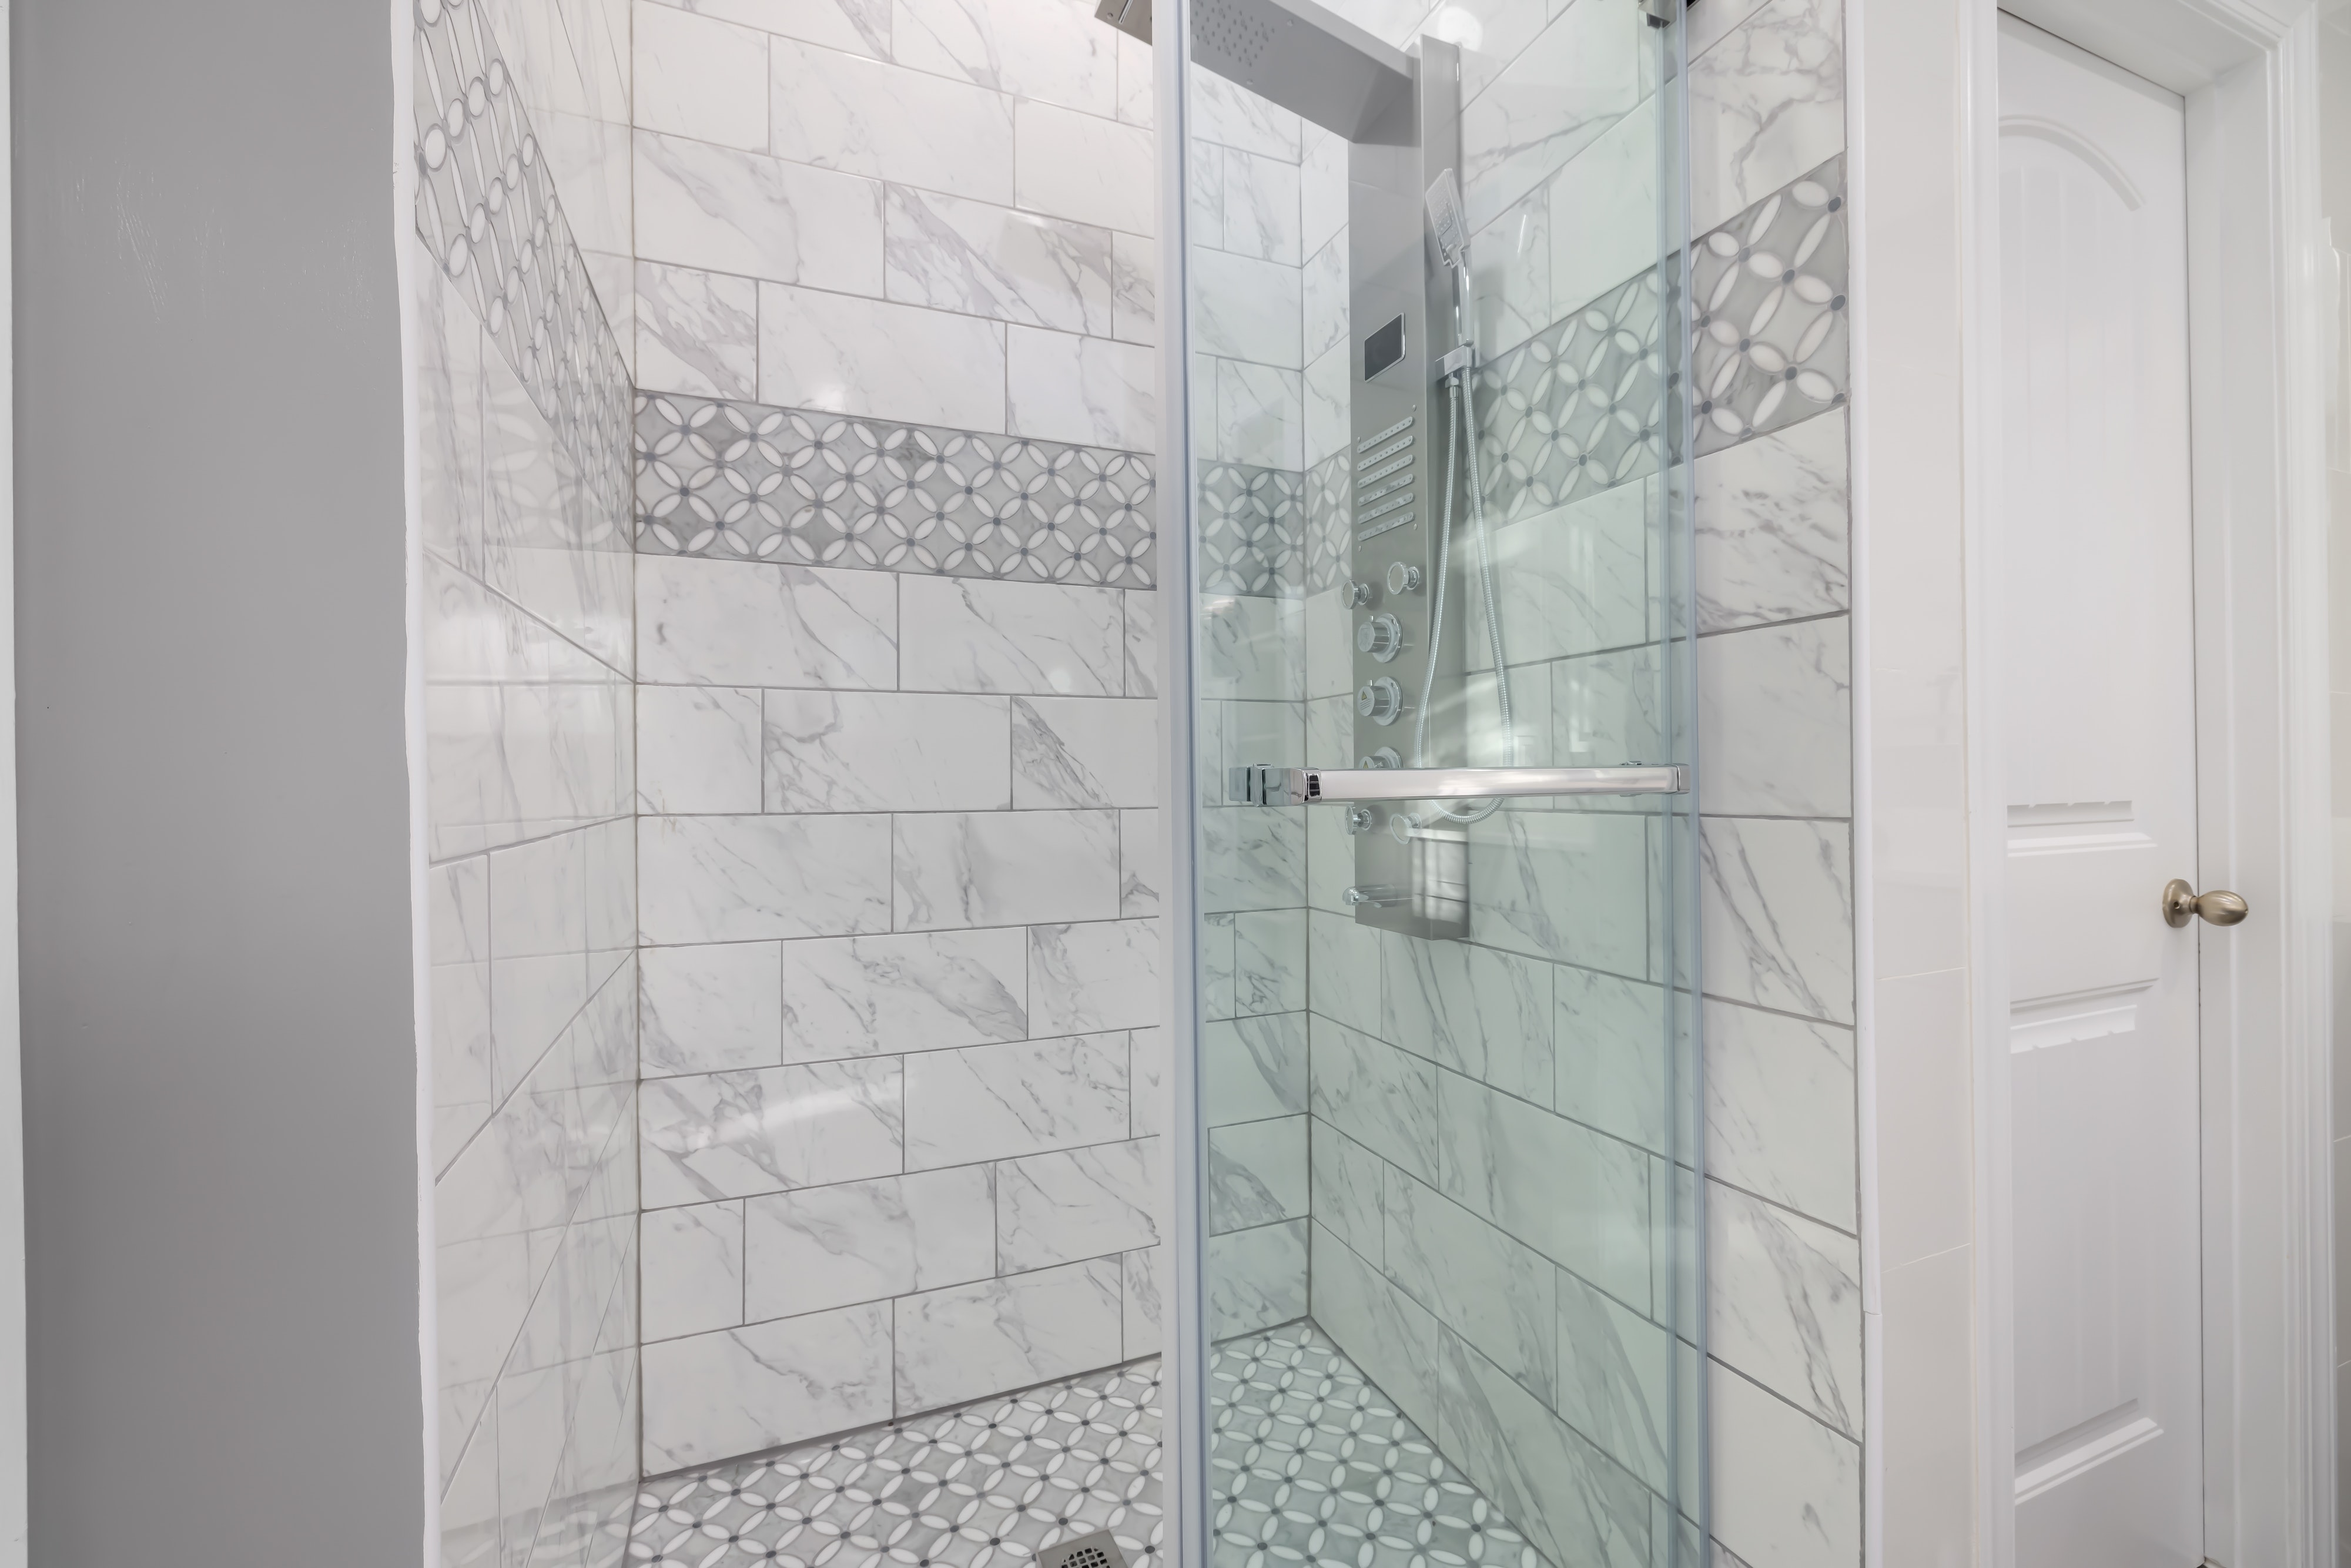 Walk in shower enclosure equipped with a chrome shower column with massaging jets